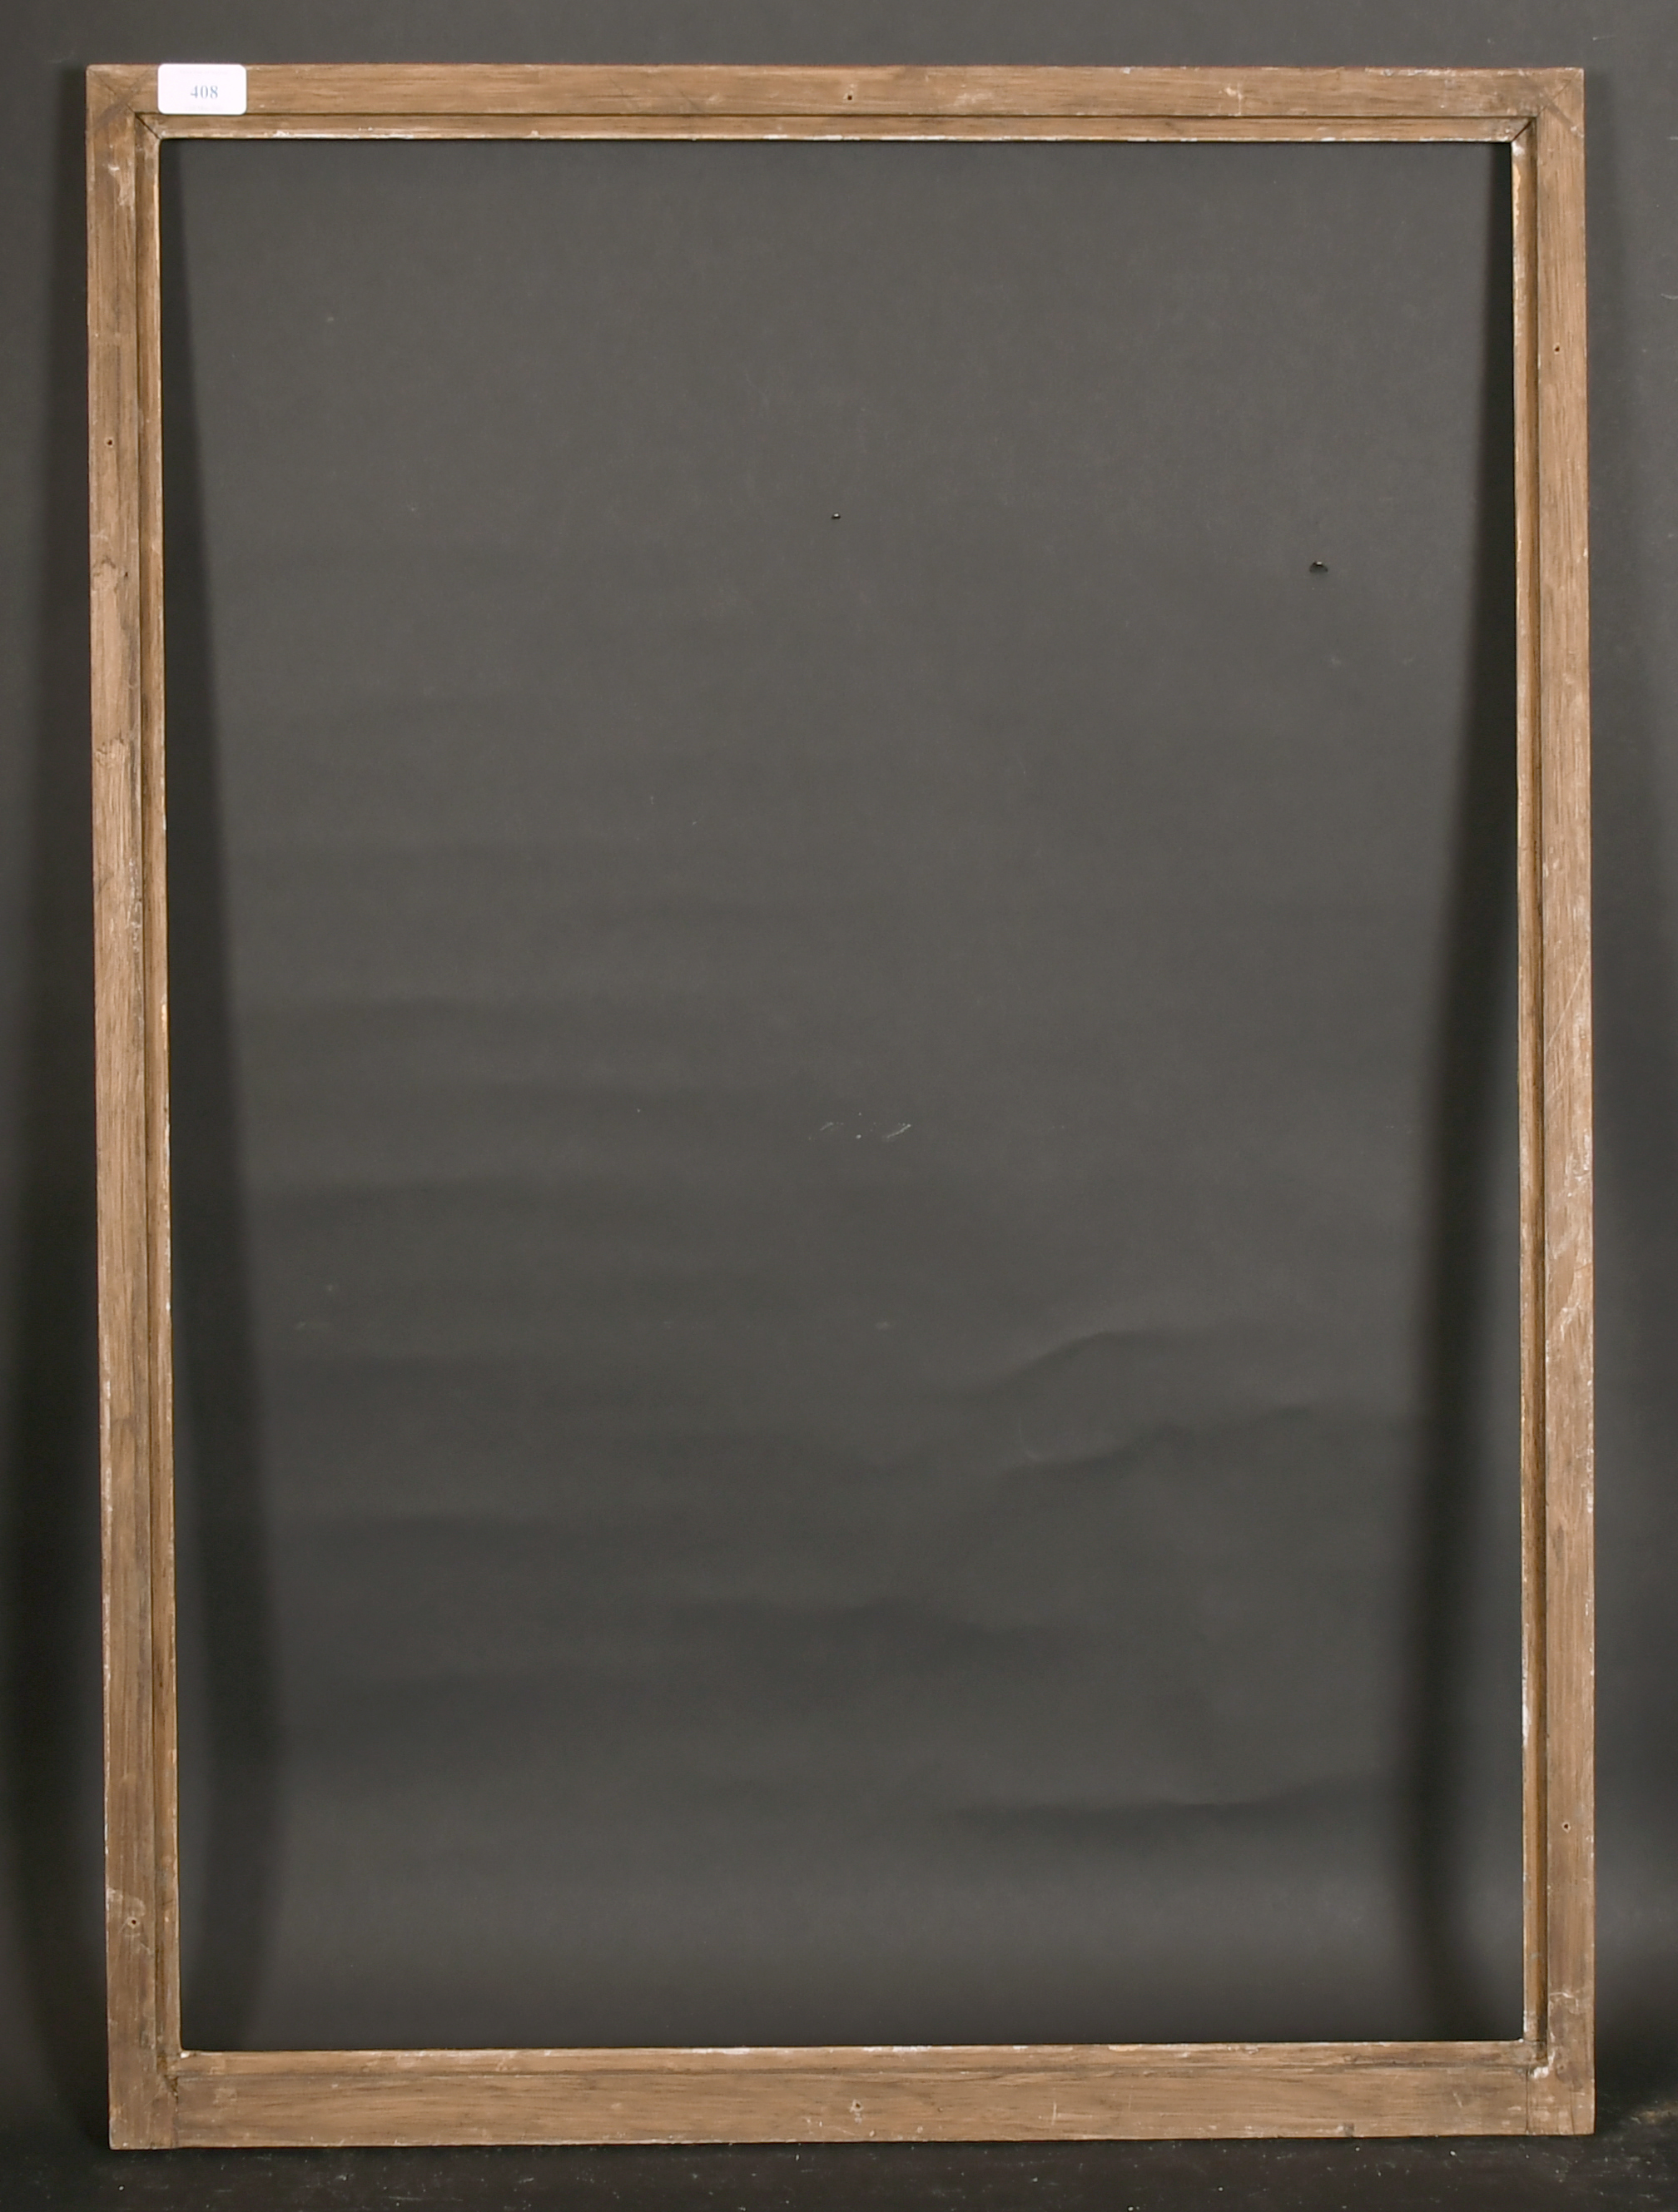 20th Century English School. A Gilt Frame with a Temple base, rebate 34” x 24” (86.3 x 61cm) - Image 3 of 3